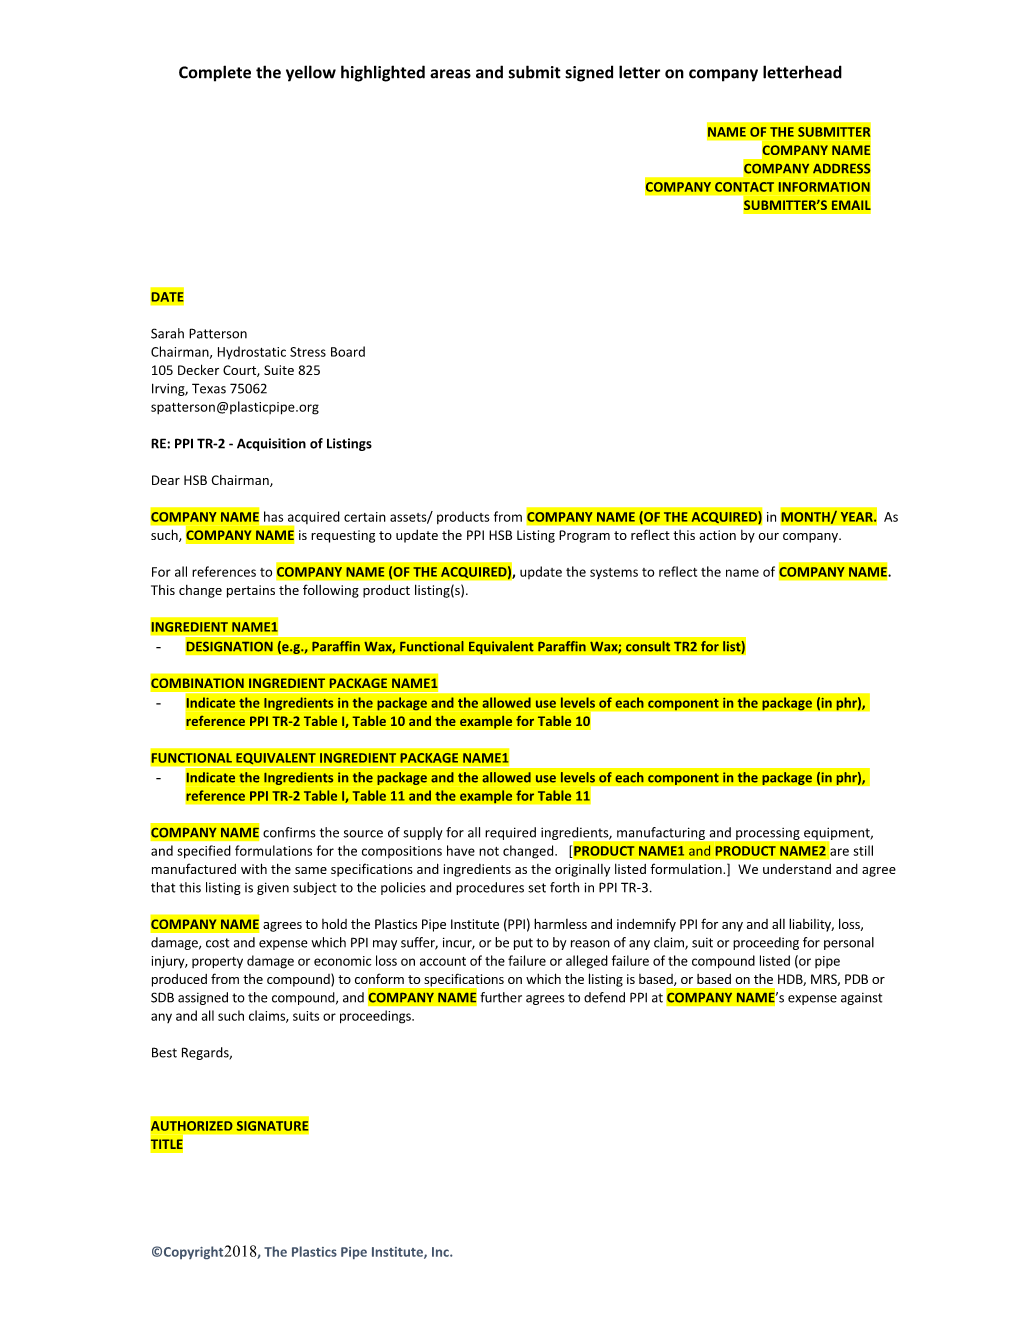 Complete the Yellow Highlighted Areas and Submit Signed Letter on Company Letterhead